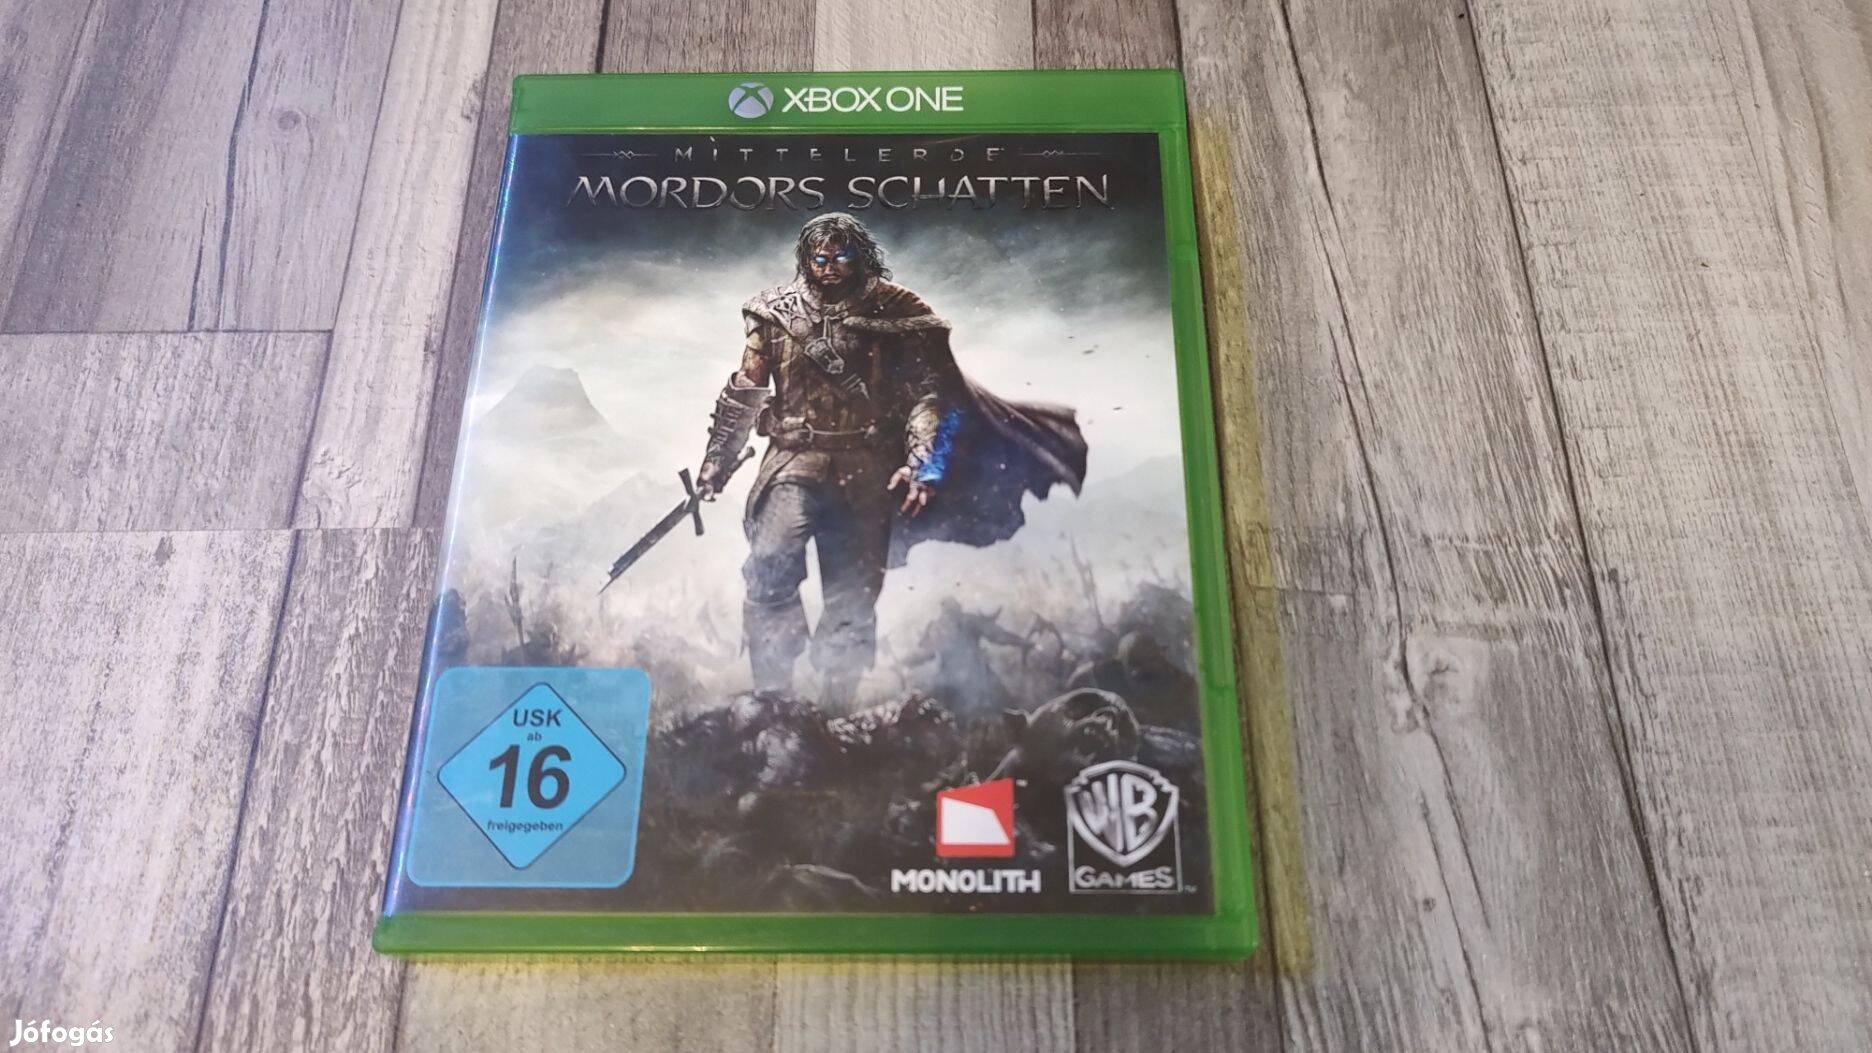 Top Xbox One(S/X)-Series X : Middle Earth Shadow Of Mordor